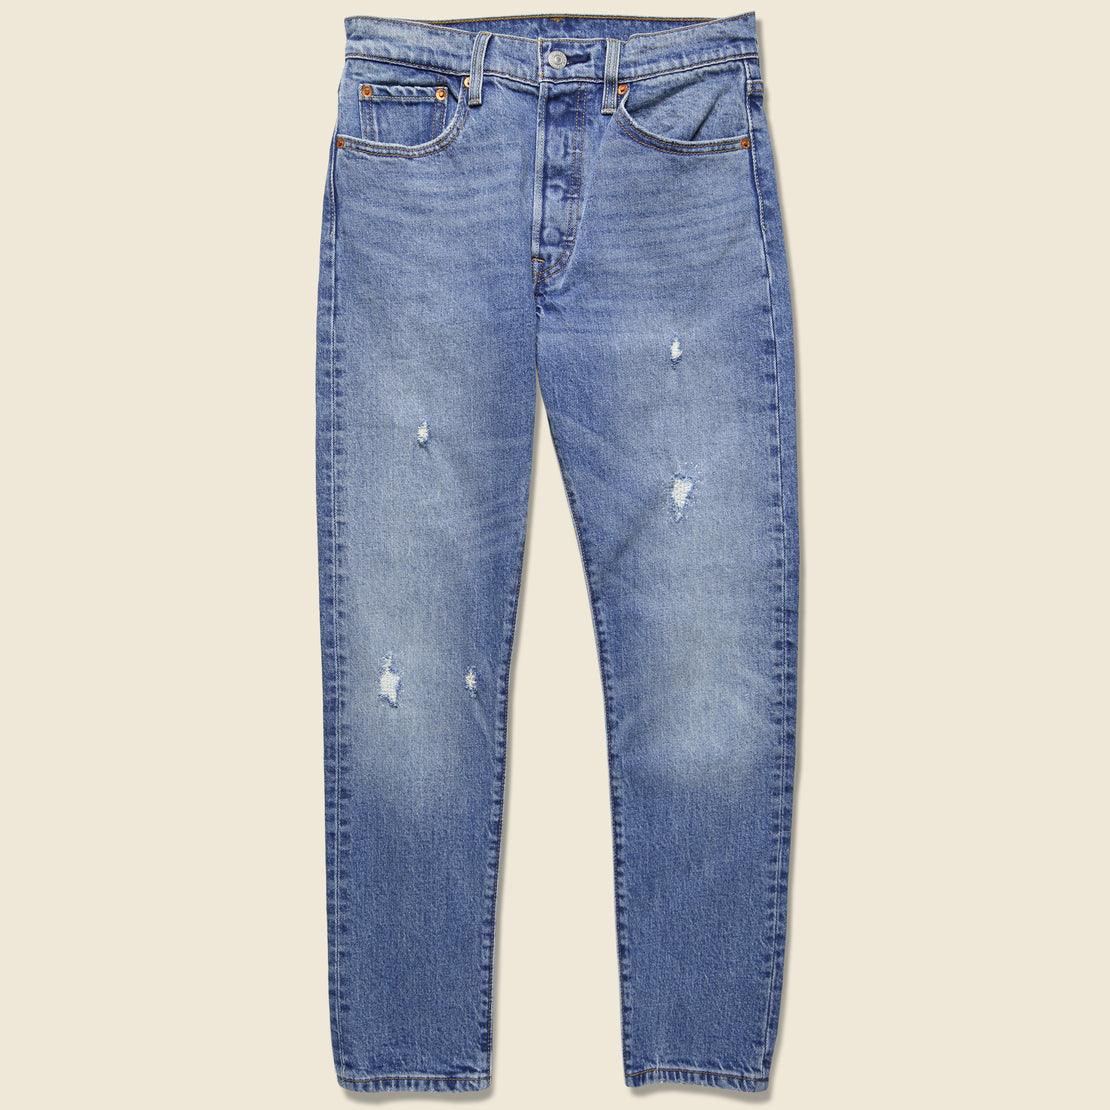 Levis Premium 501 Skinny Jean - Leave A trace